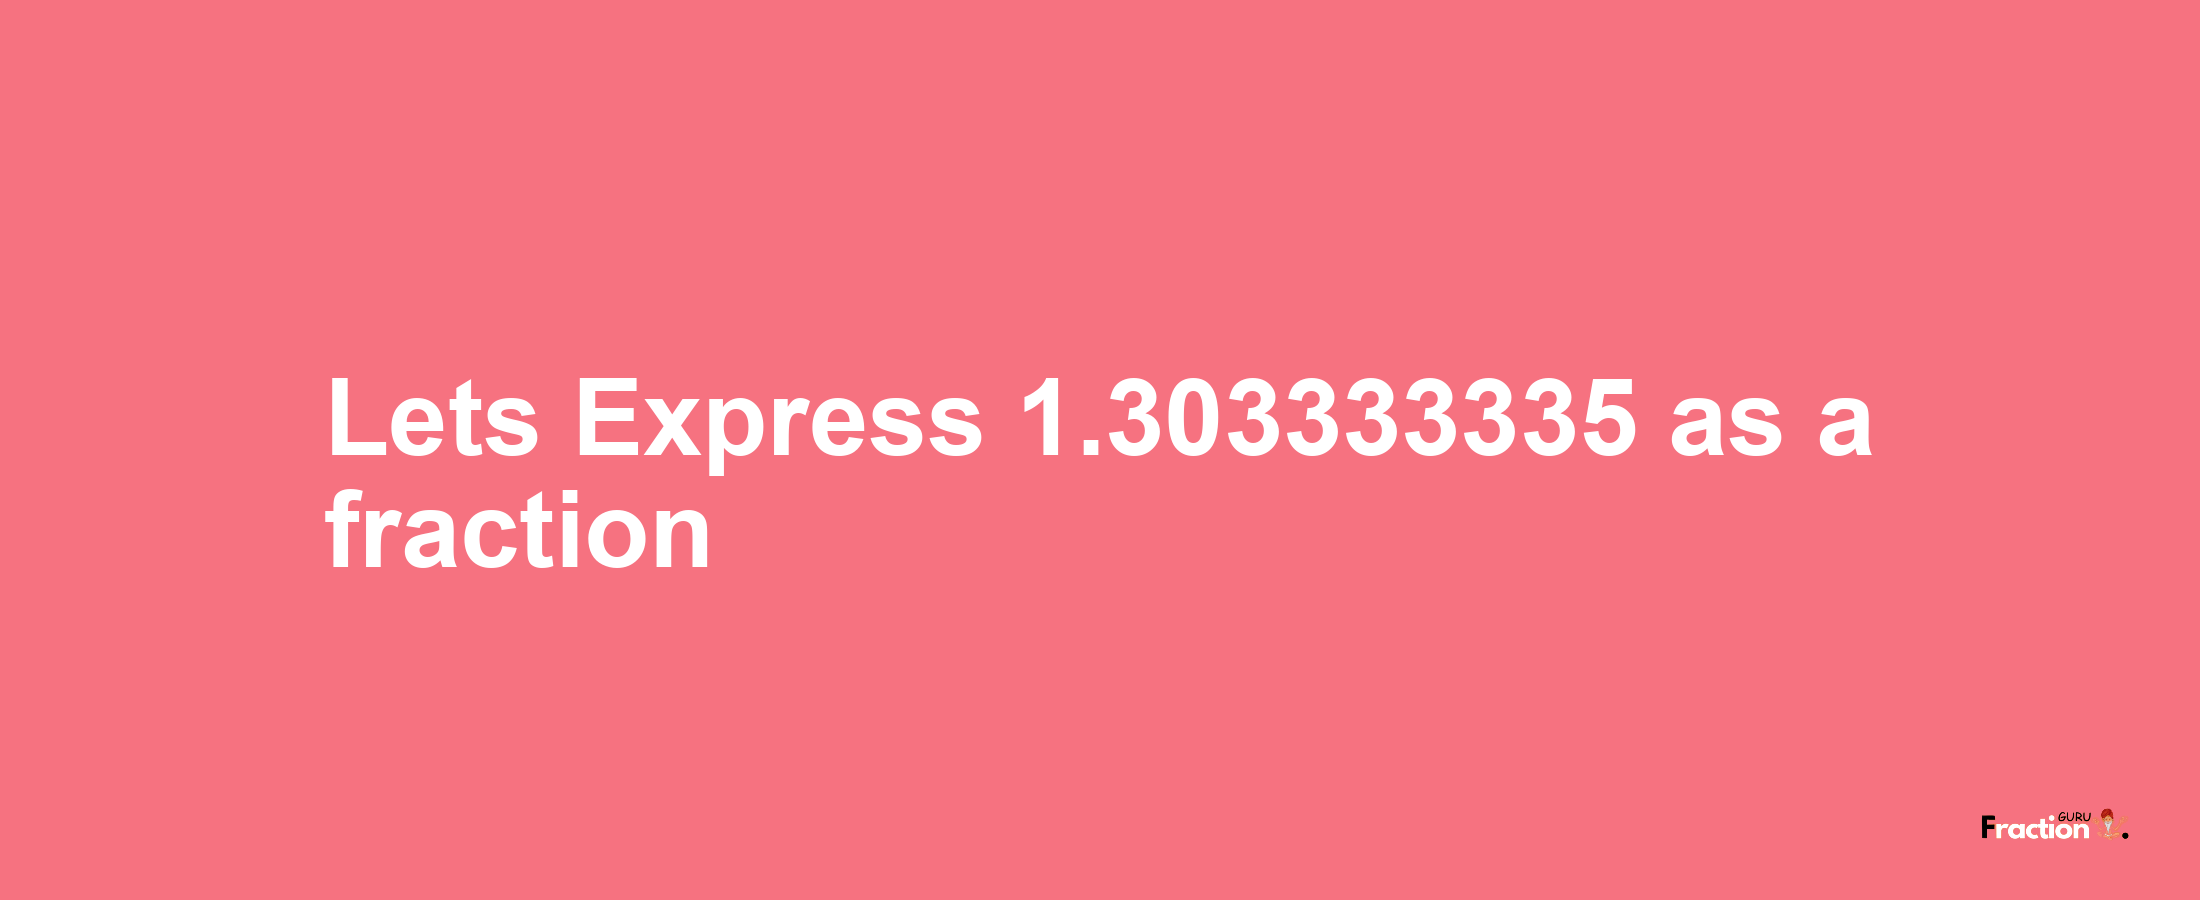 Lets Express 1.303333335 as afraction